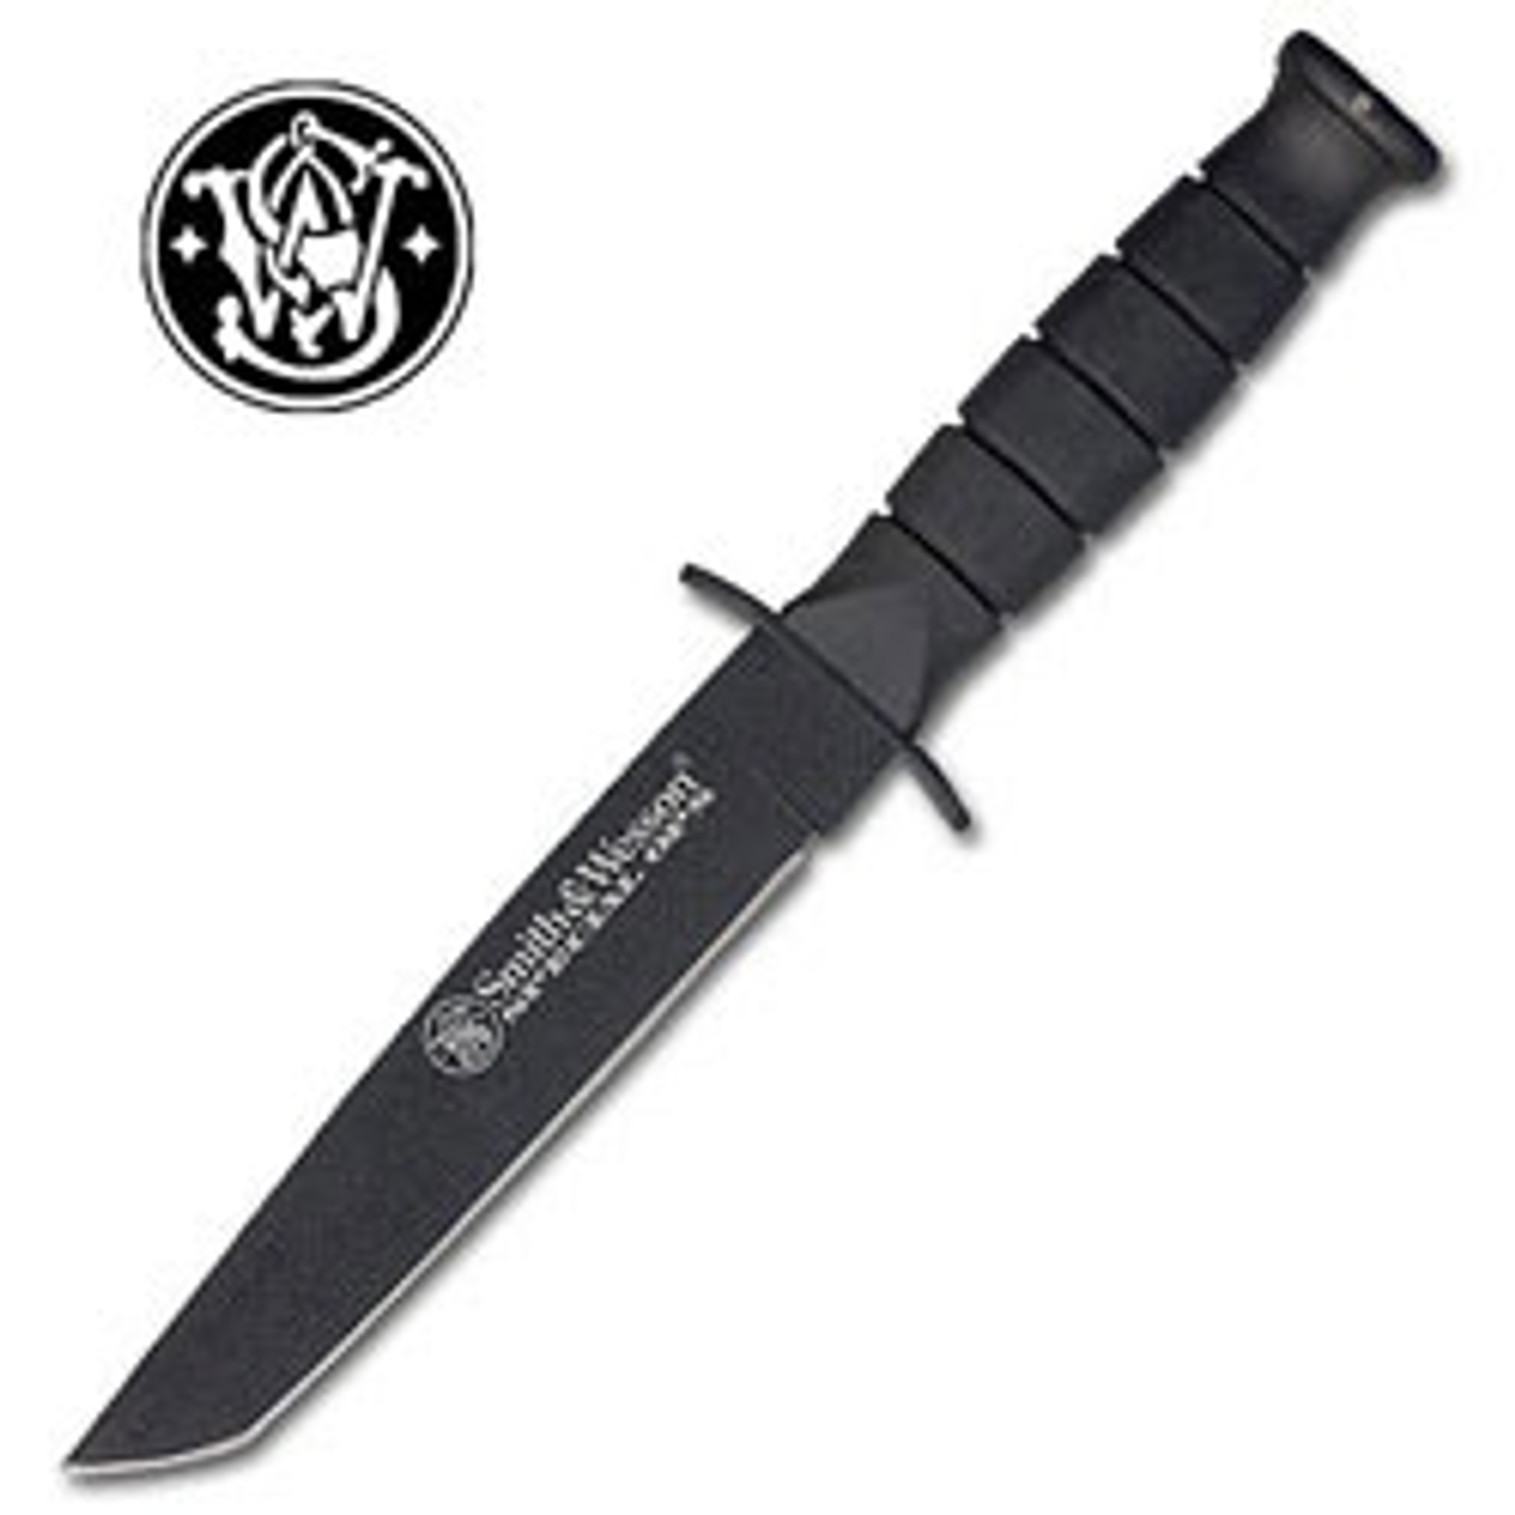 Smith & Wesson Search & Rescue Tanto Survival Knife